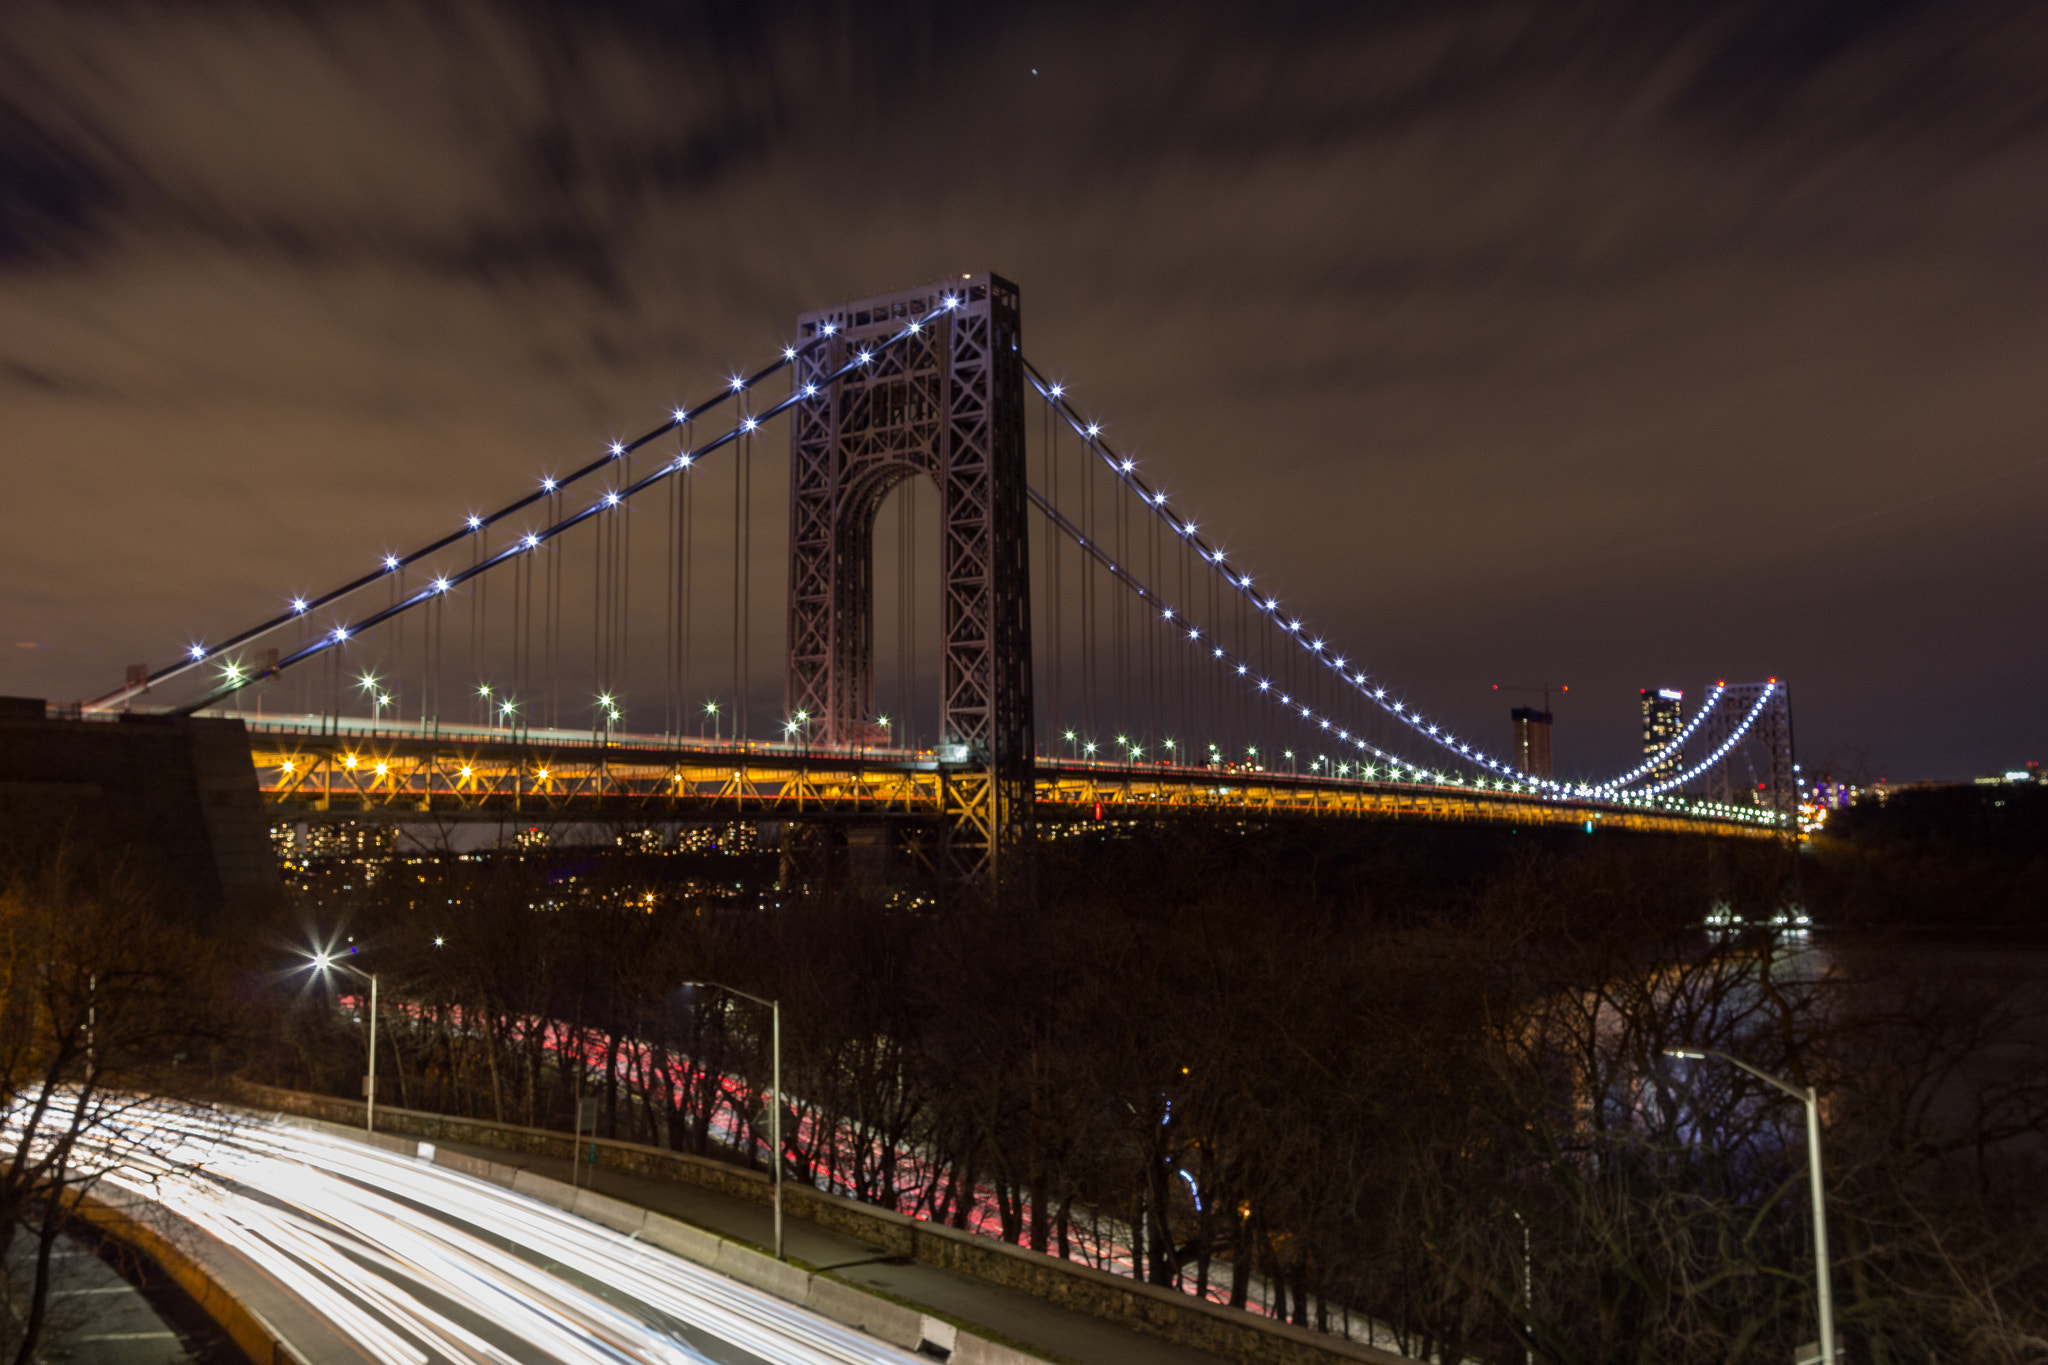 Tamron AF 19-35mm f/3.5-4.5 sample photo. The george washington bridge after dark from high above the street photography